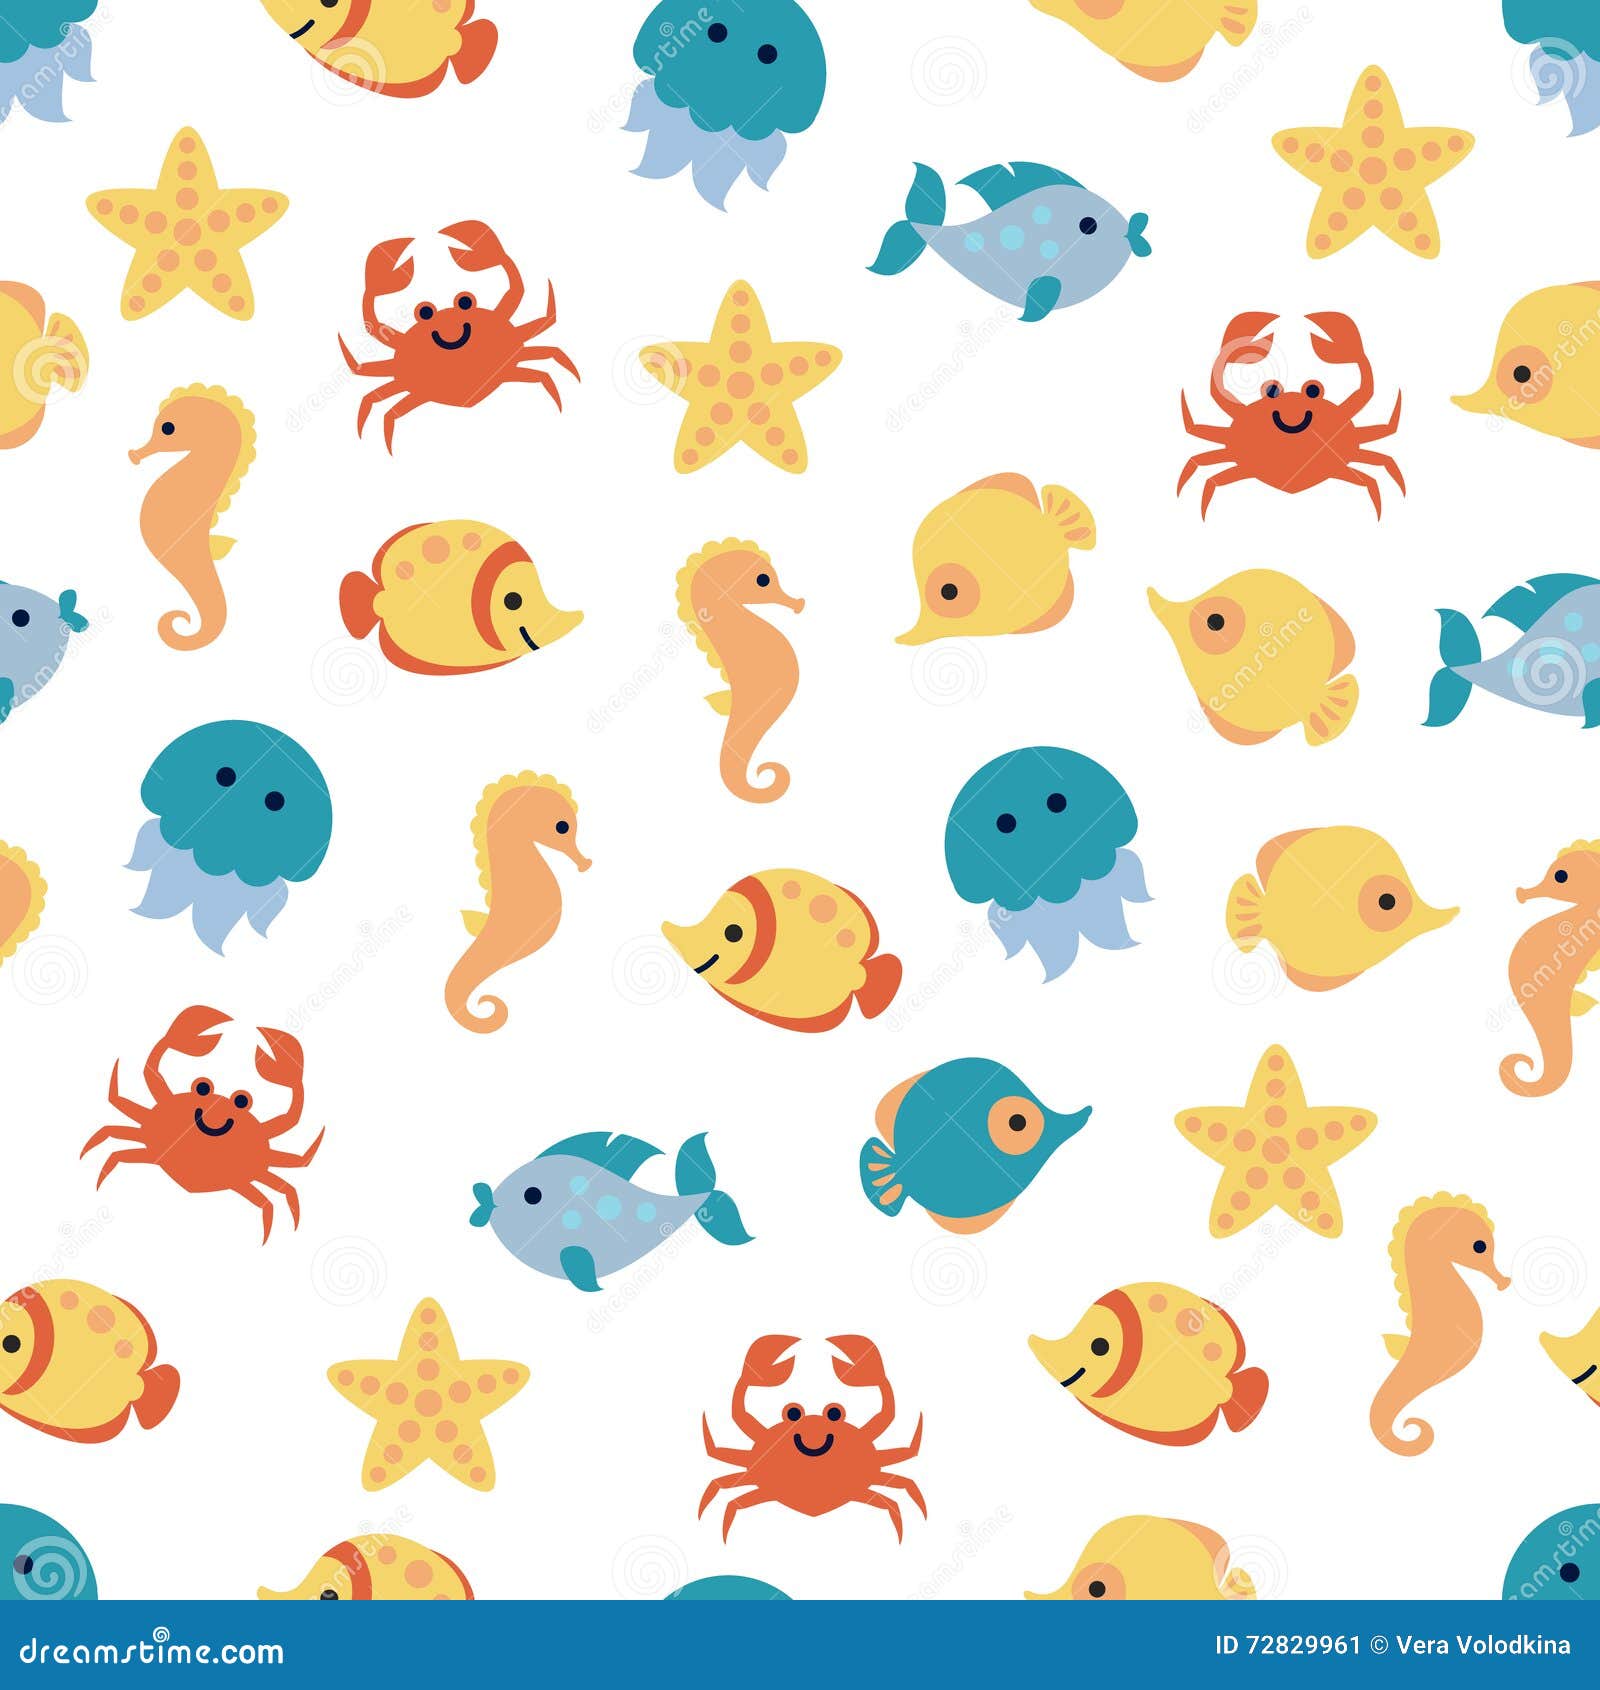 Seamless Pattern With Cartoon Sea Animals On White Background. Stock
Vector Illustration of